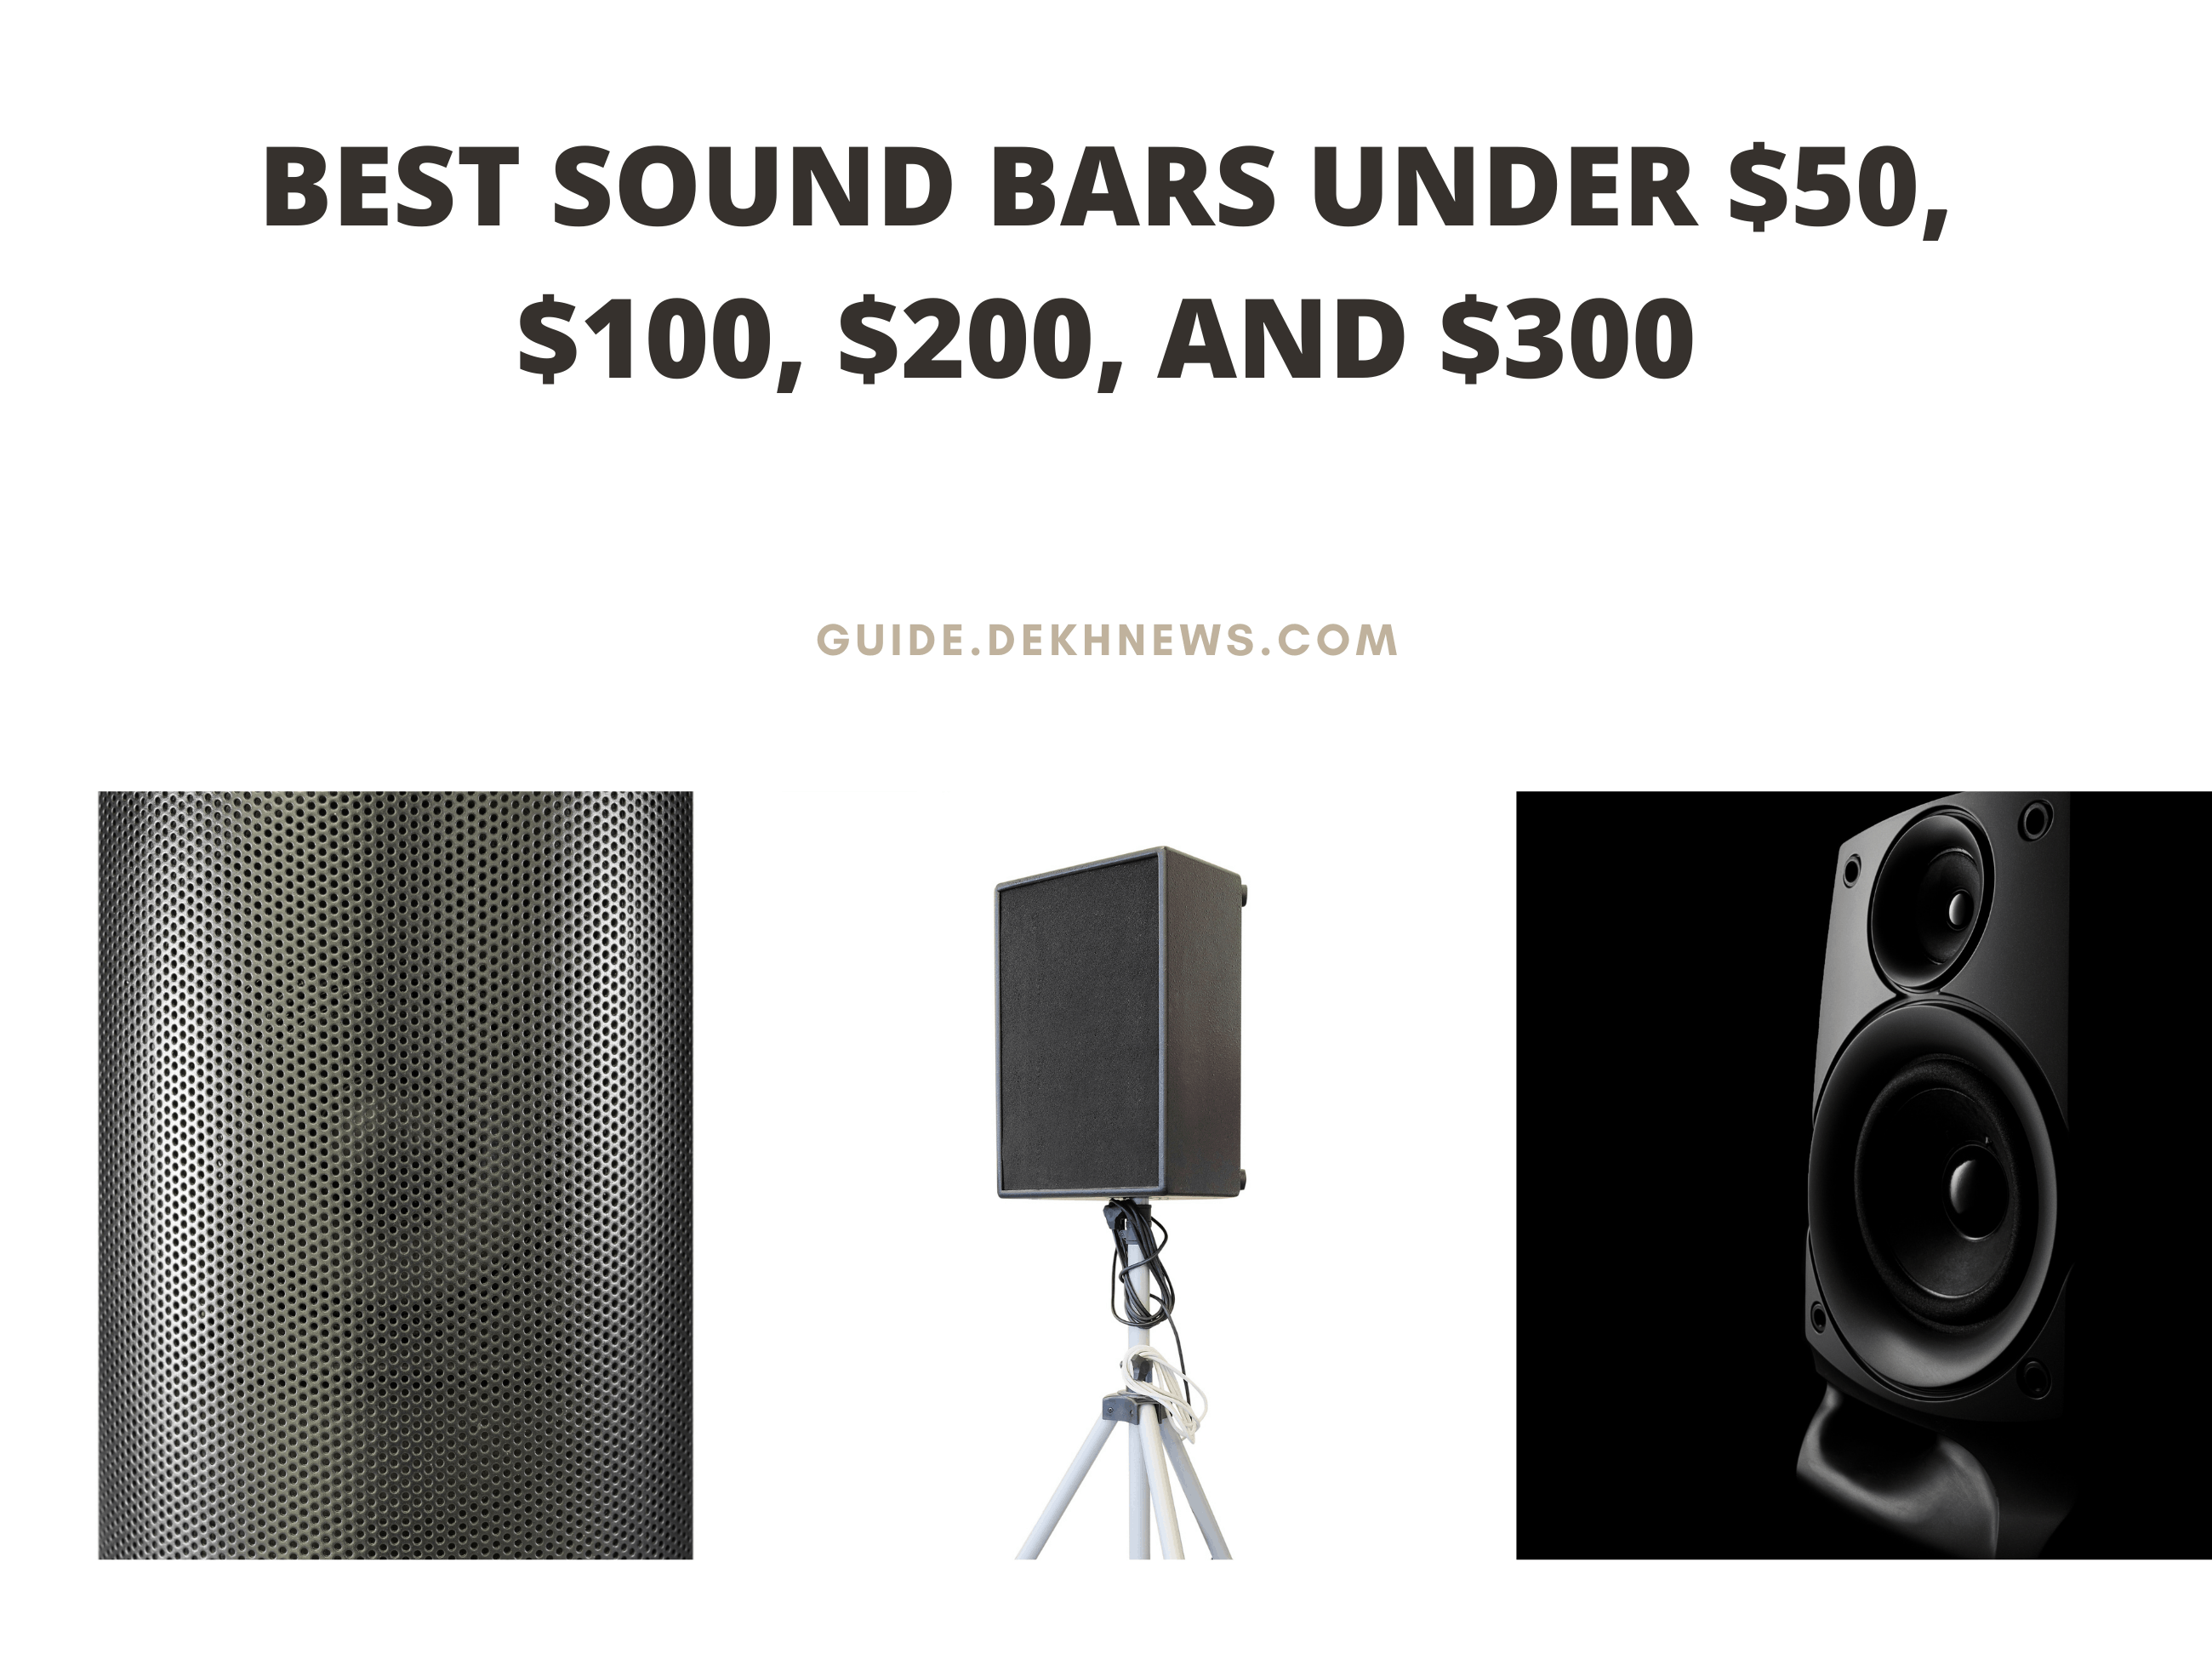 7 Best Sound Bars Under $50, $100, $200, and $300 (2021 Reviews)